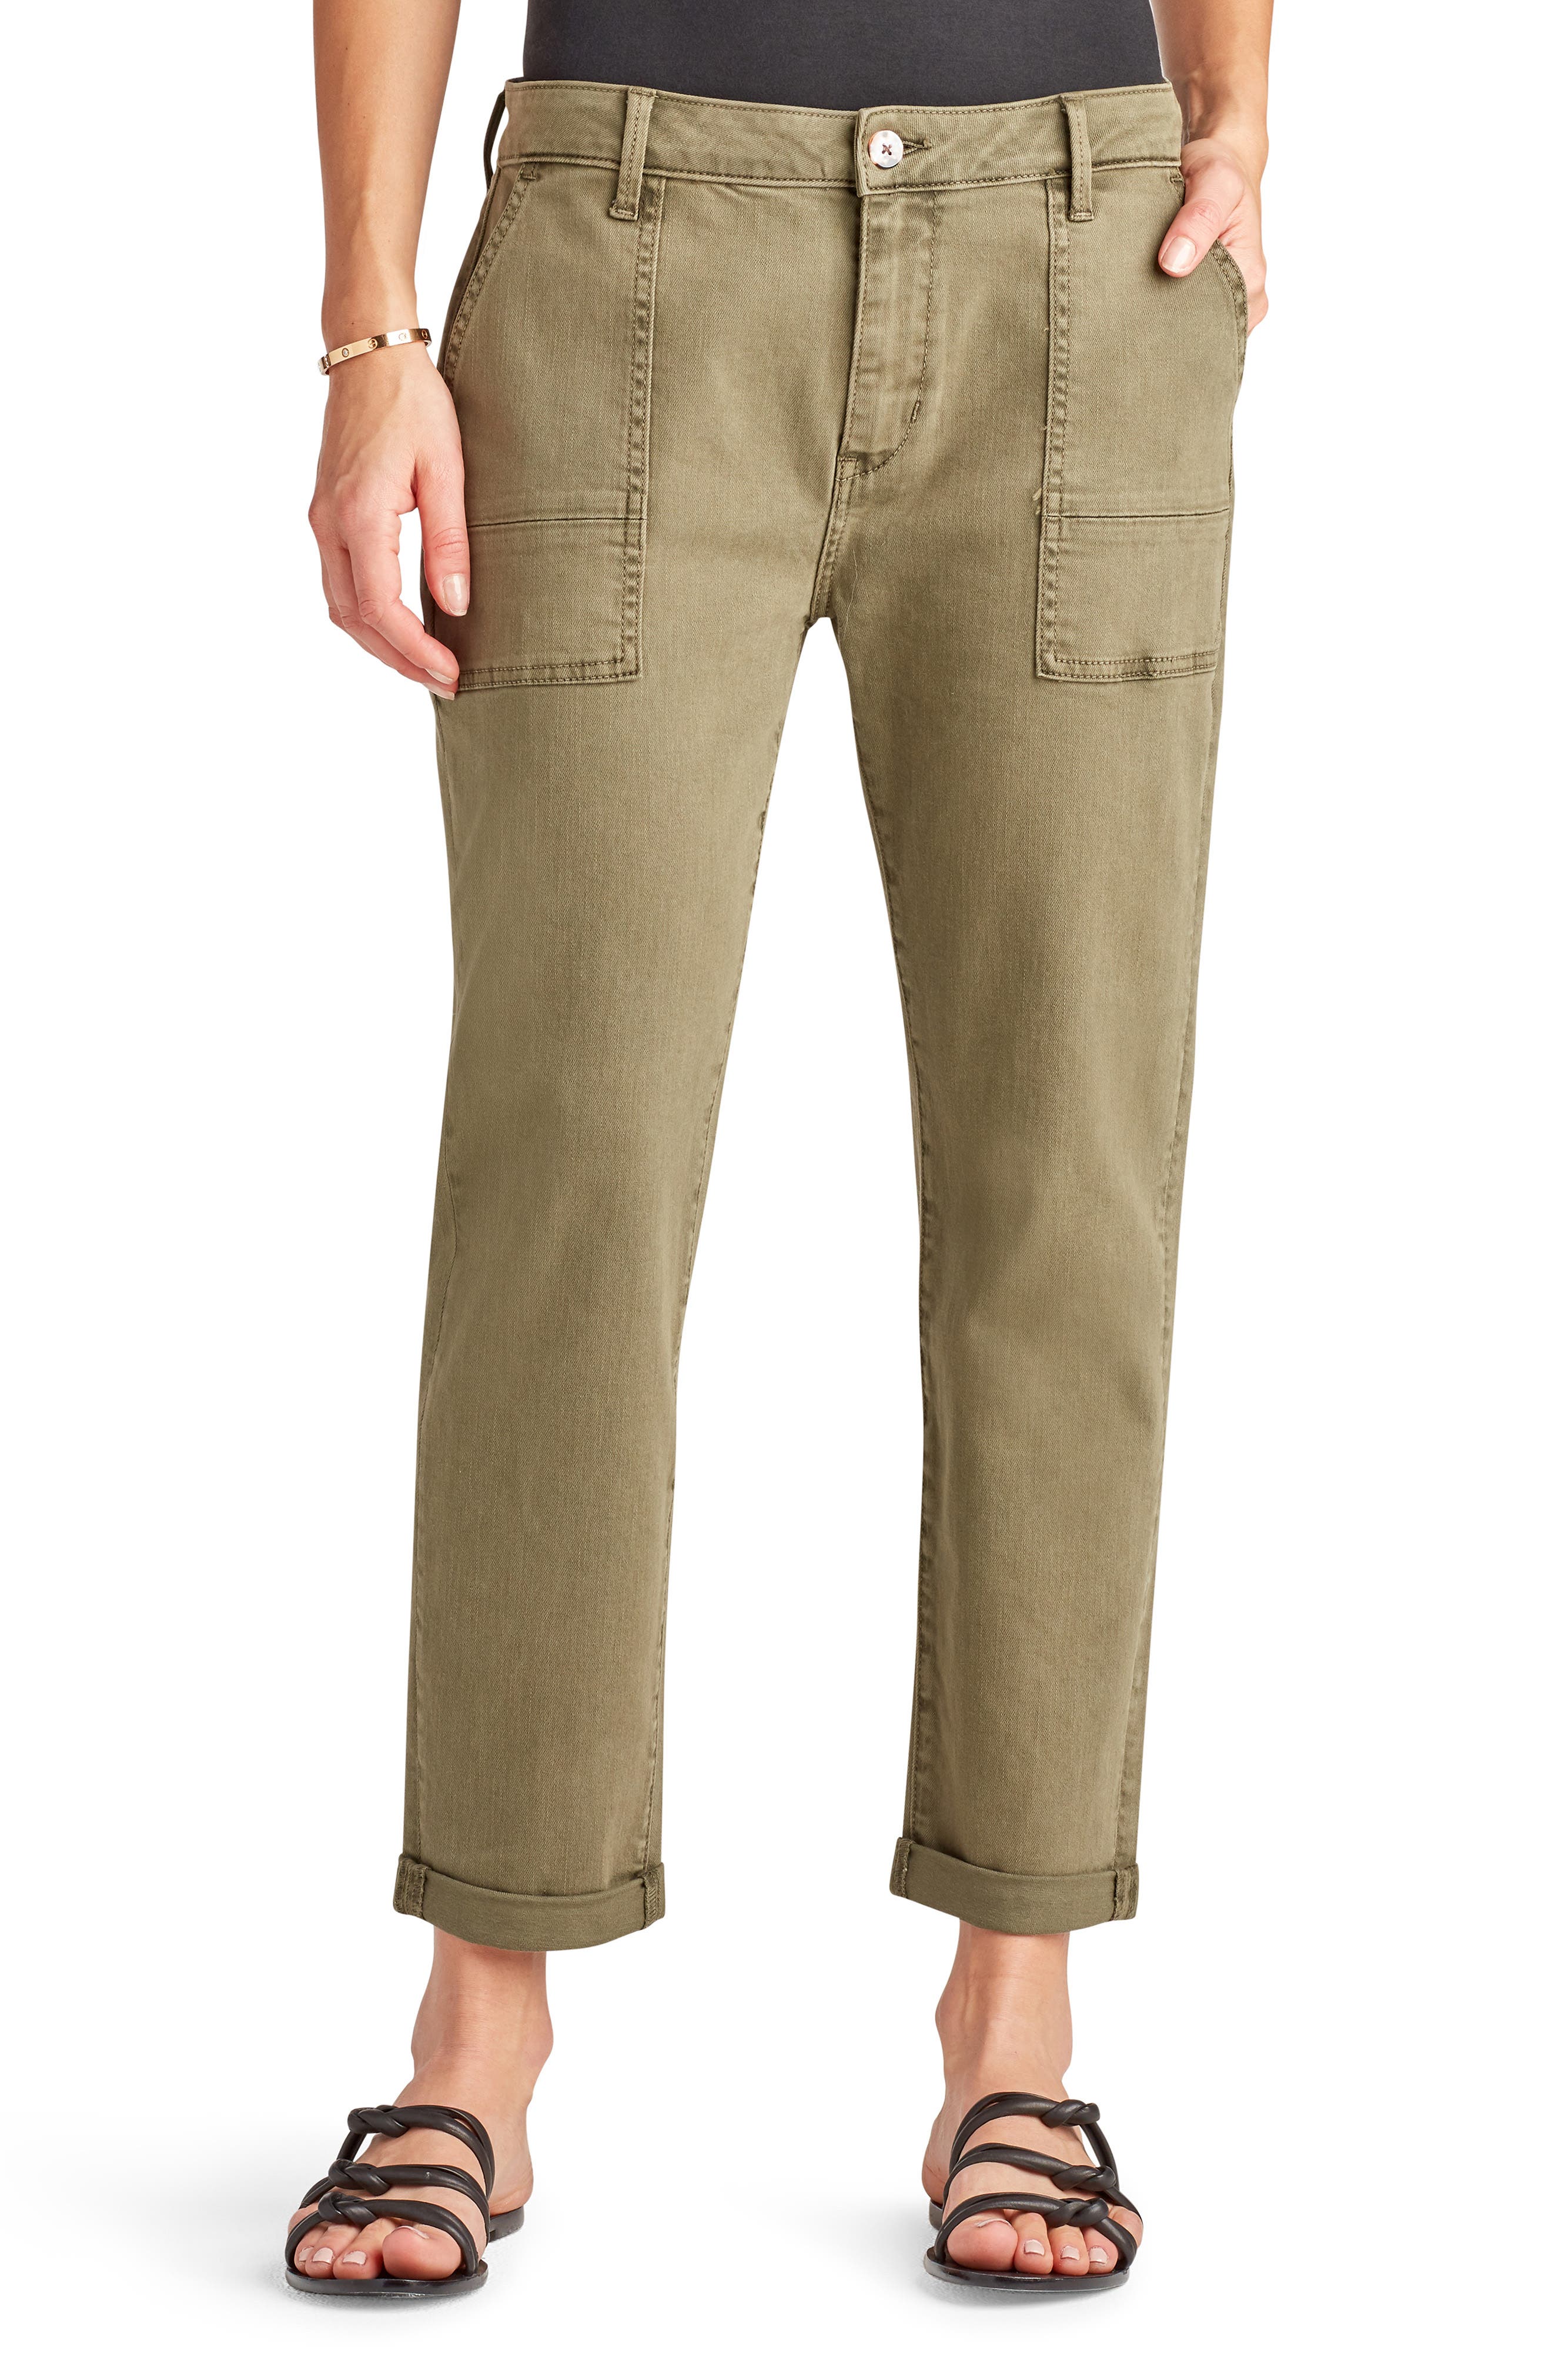 pants with cuffed ankles